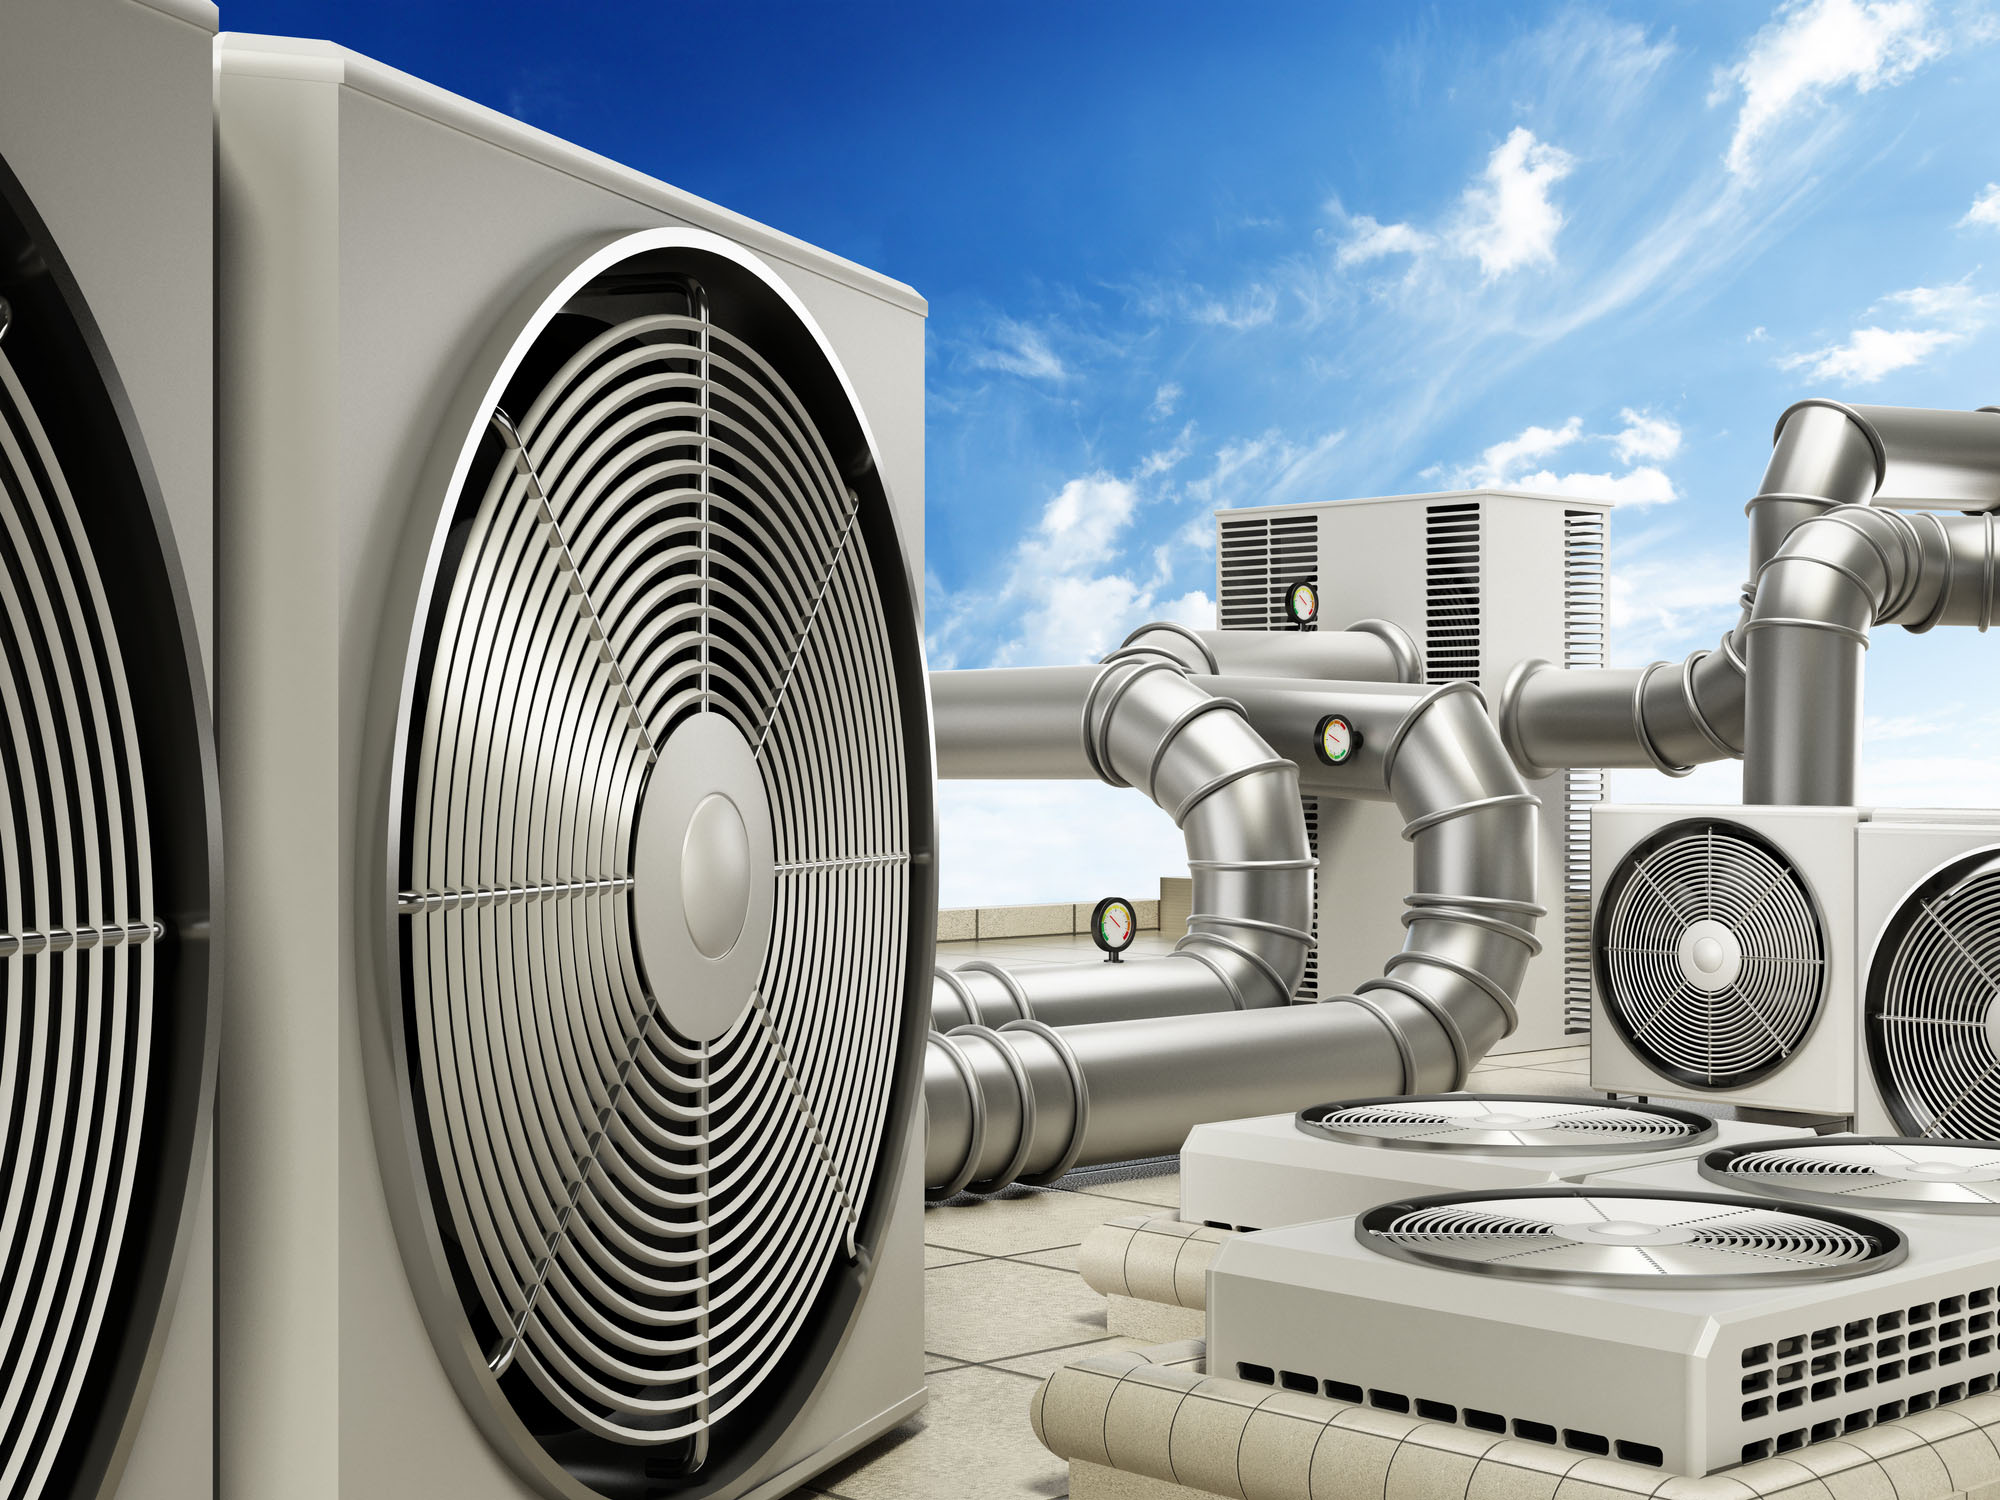 Air conditioning system with air conditioners, ventilators and pipes on top of a building.